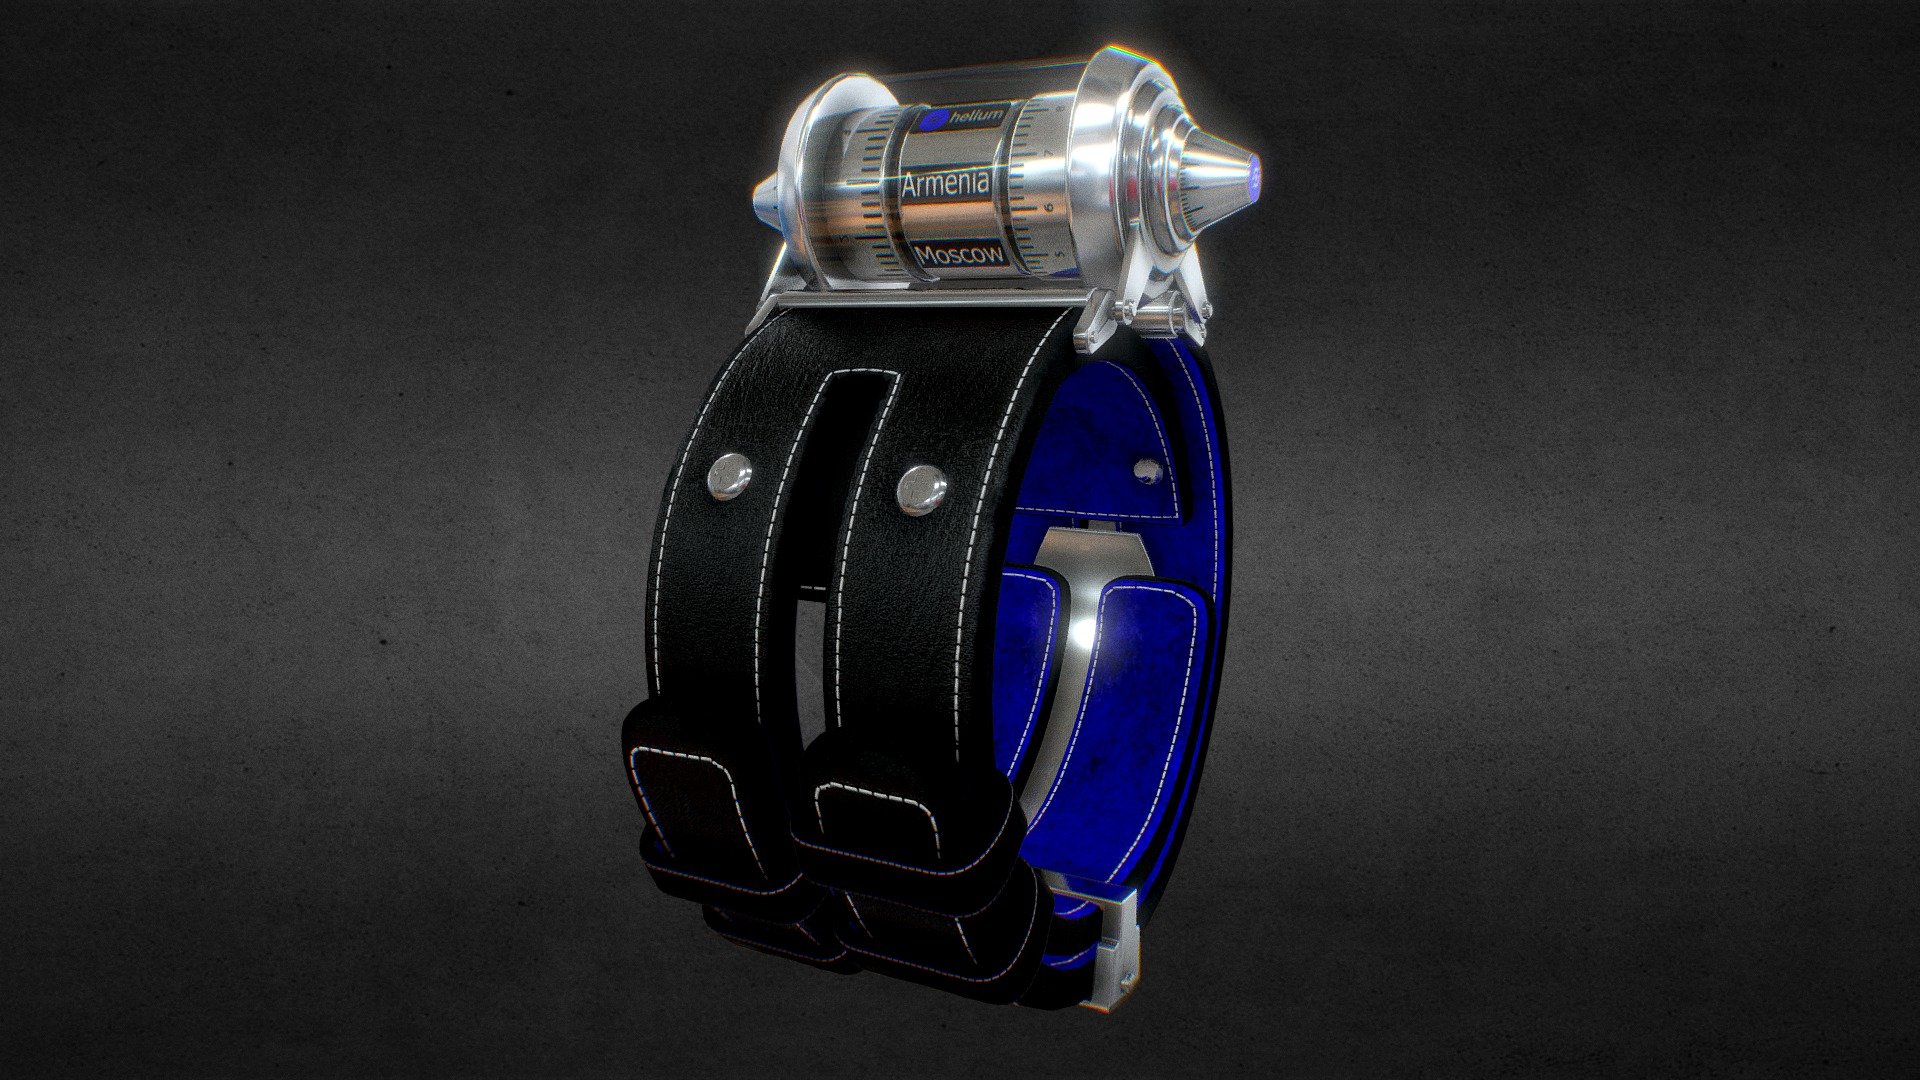 Awersome stainless steel Helium Coin Watch.

Currently available for download in FBX format.

3D model developed by AR-Watches 3d model